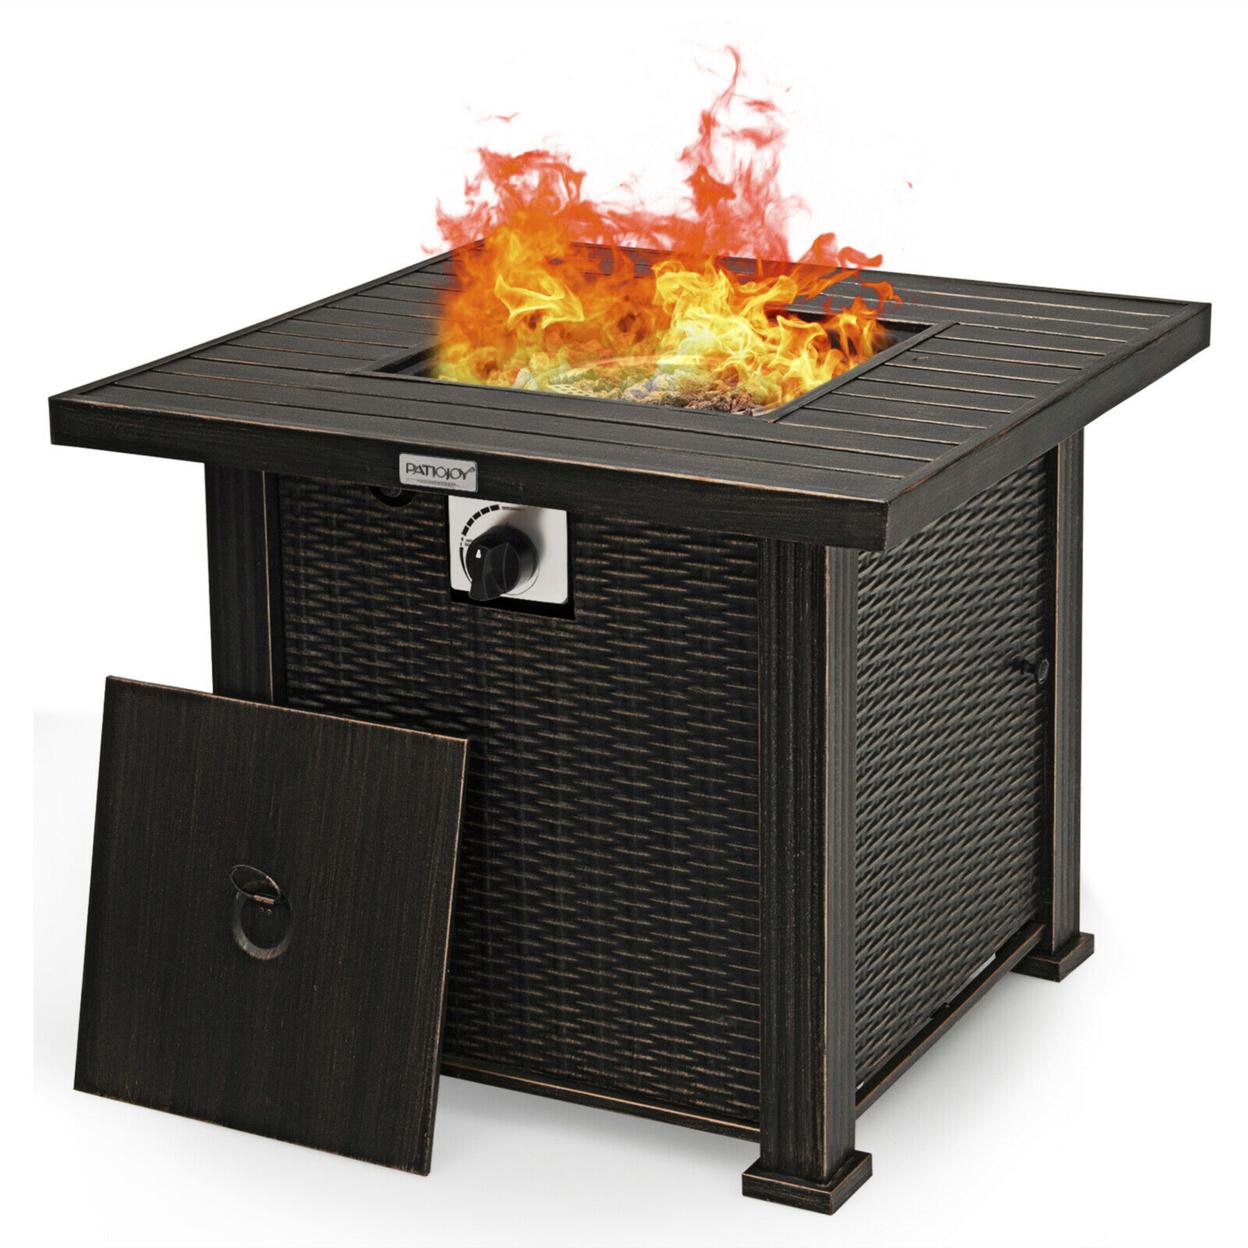 Gymax 30" Gas Fire Pit Table 50,000 BTU Square Propane Fire Pit Table W/ Cover